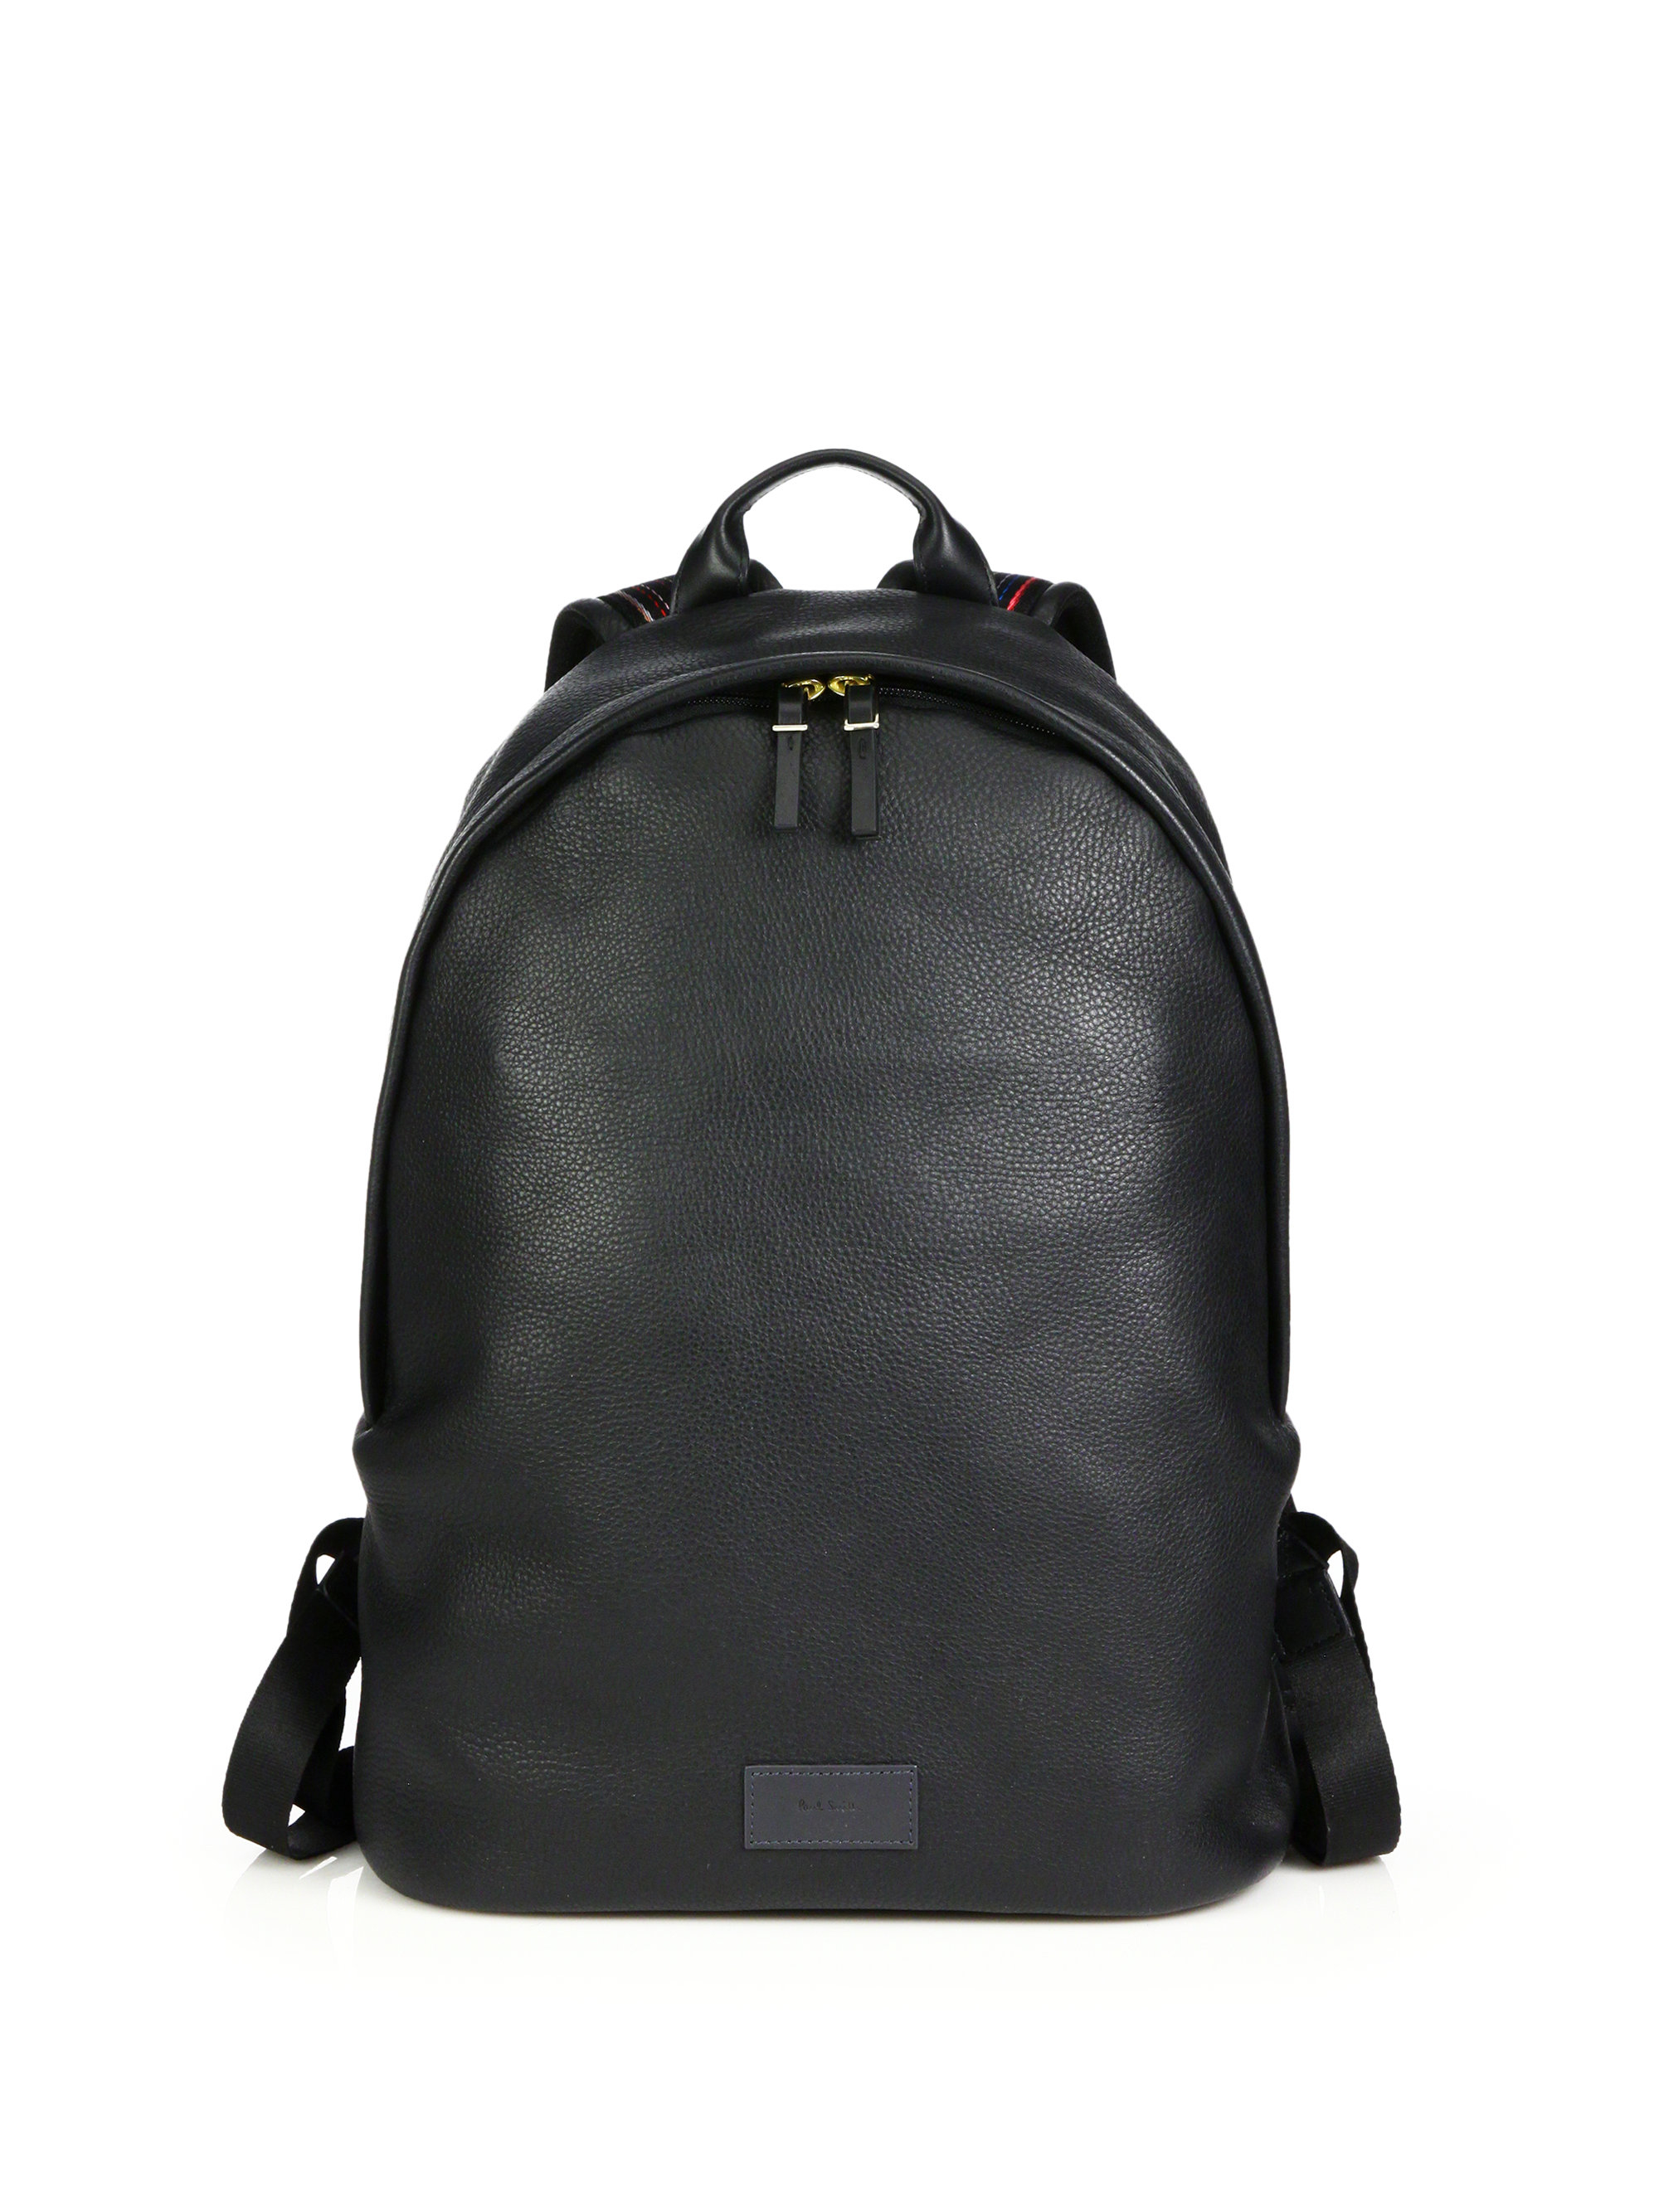 Paul smith Leather Backpack in Black for Men | Lyst